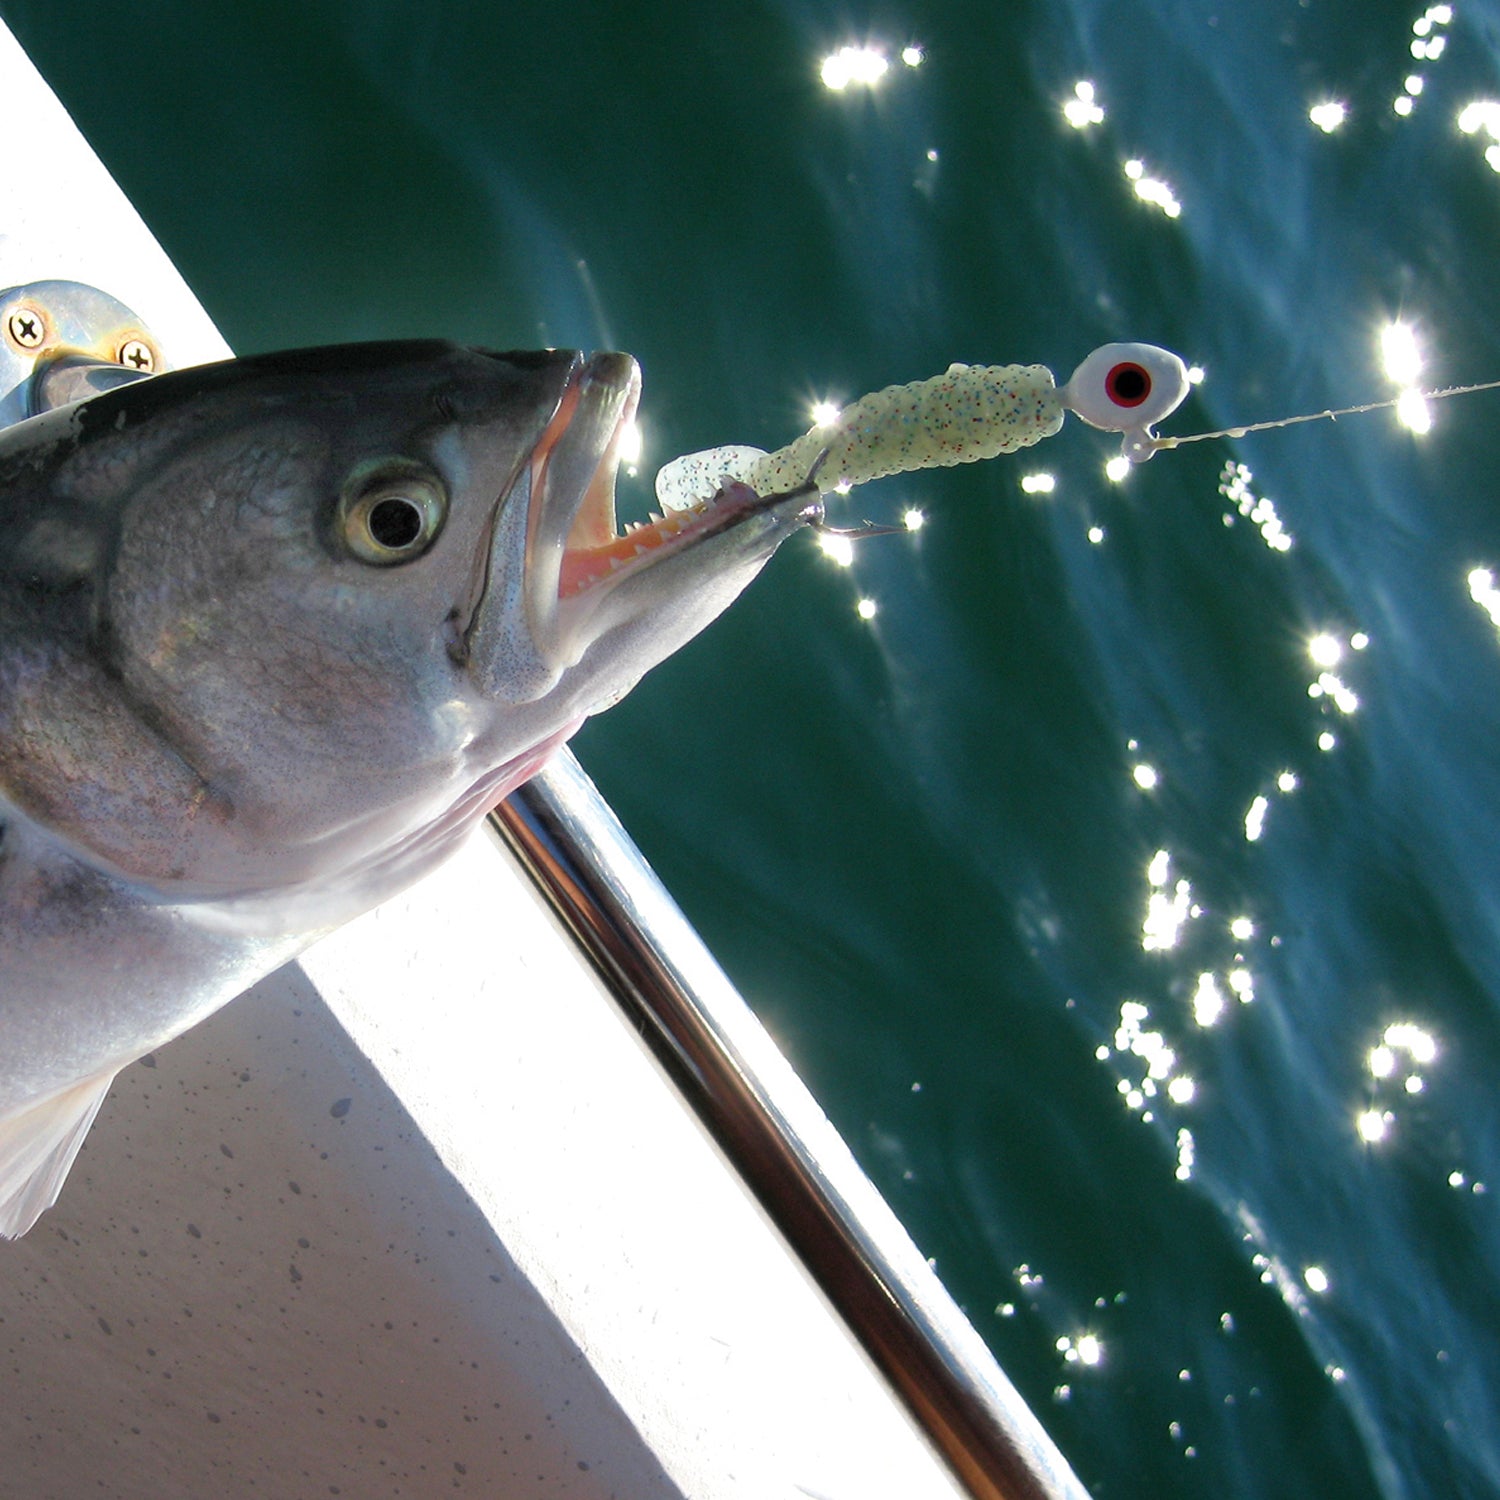 Got-cha jig head and curl tail in bluefish mouth